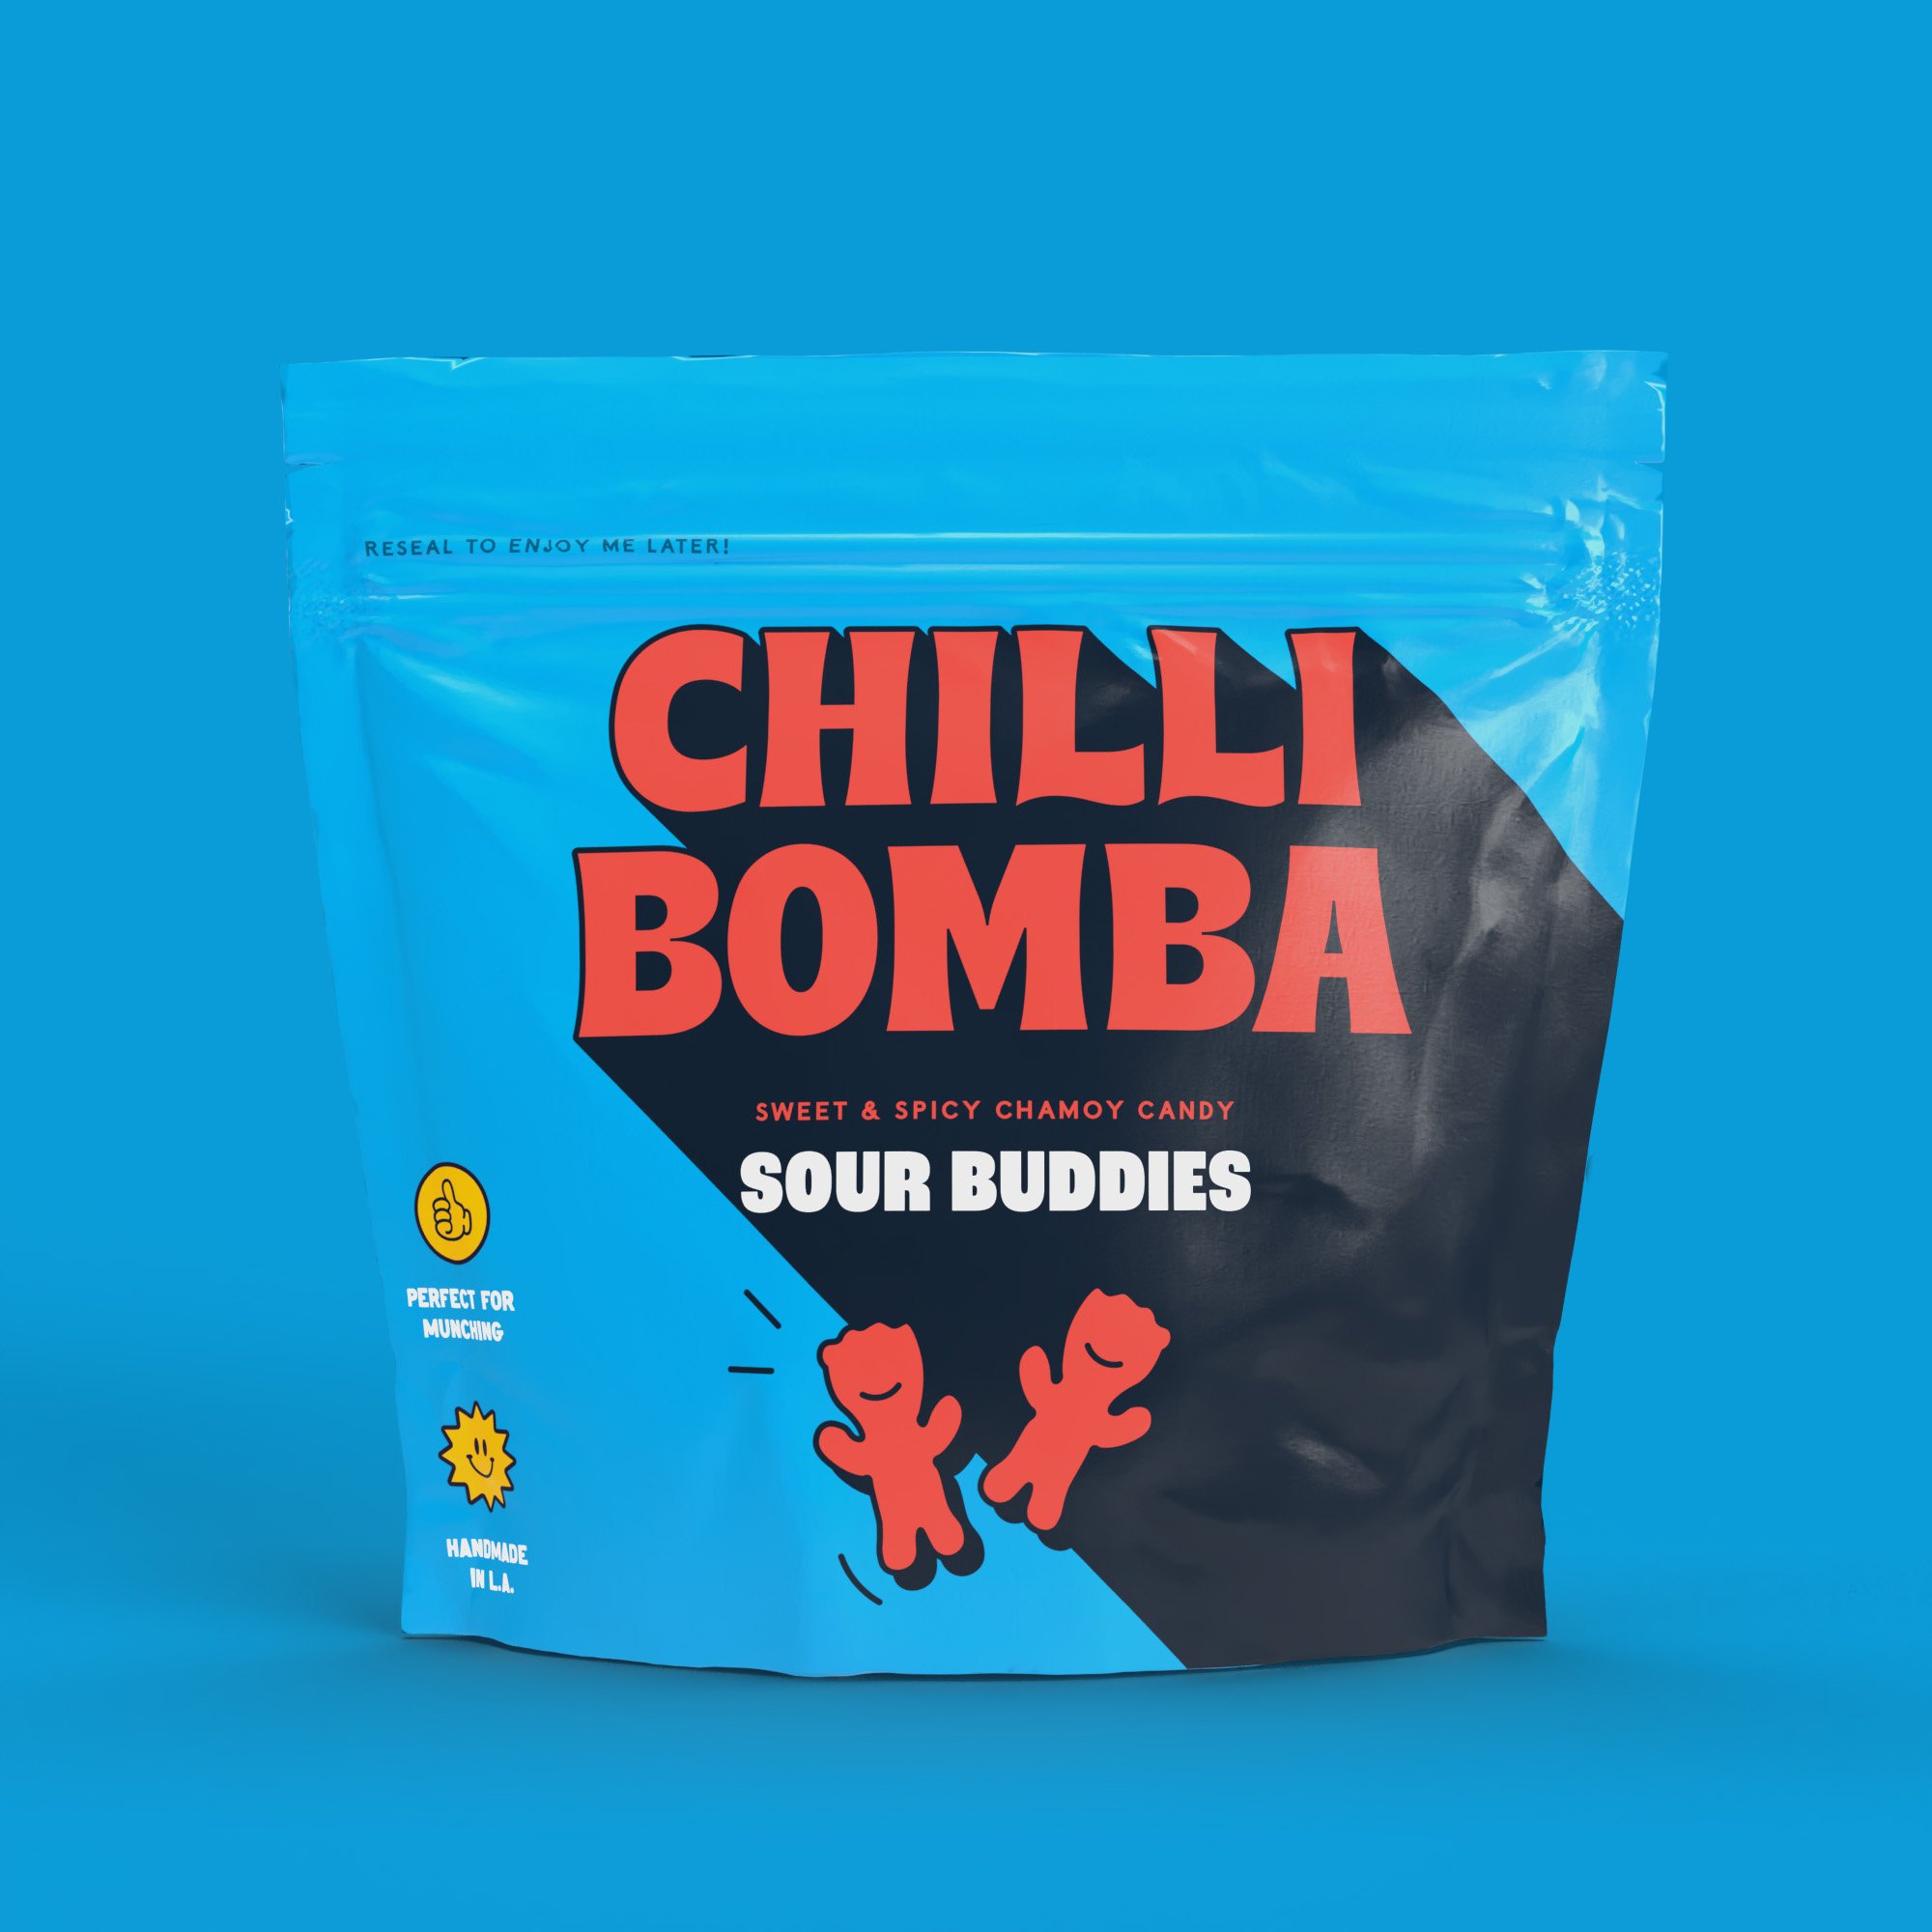 Logo, brand identity, packaging, character design and e-commerce website for gourmet adult candy Chilli Bomba designed by London-based studio New Genre